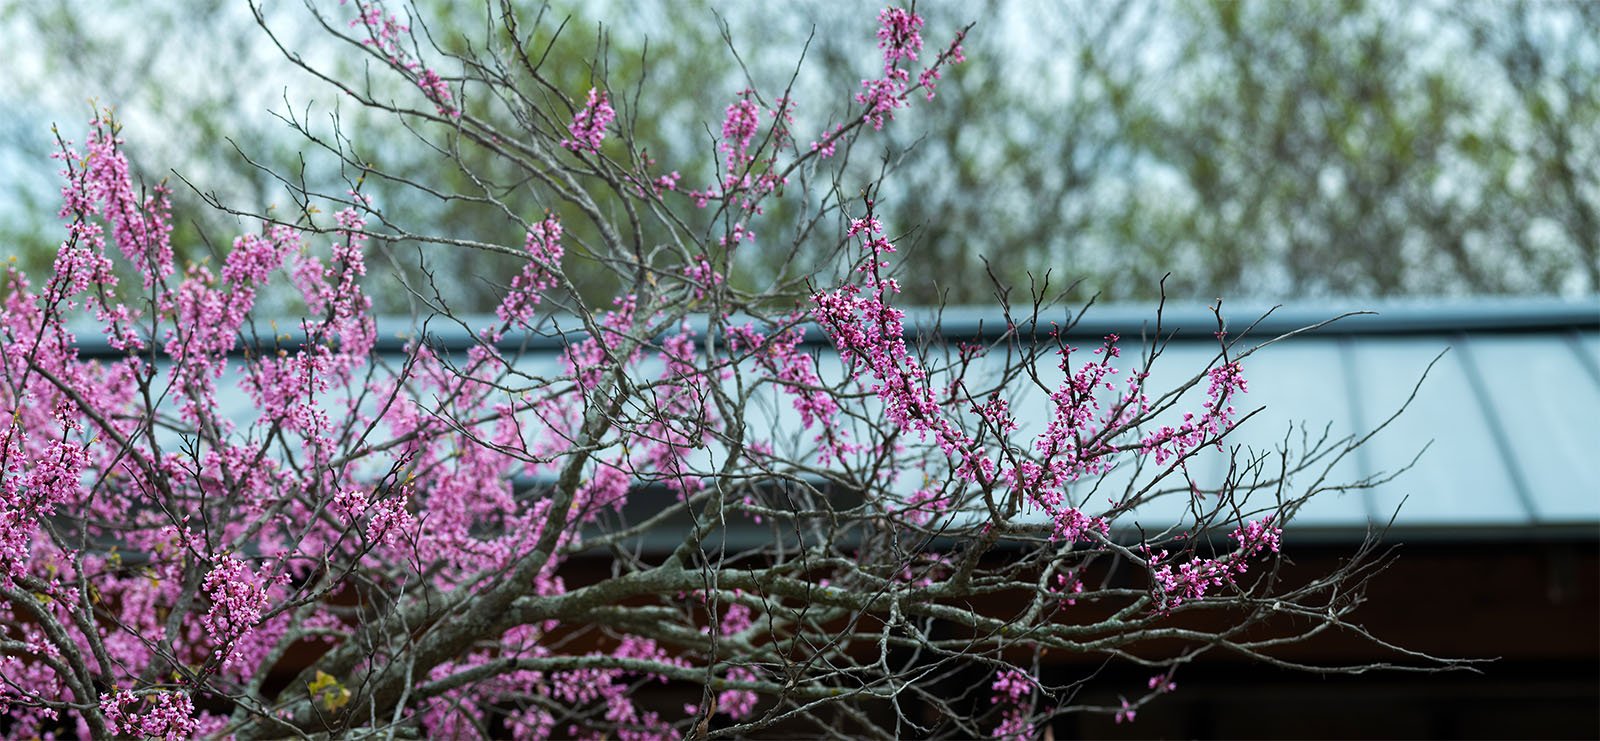 A vibrant pink flowering tree in sharp focus against a blurred background of green trees and a grey roof.